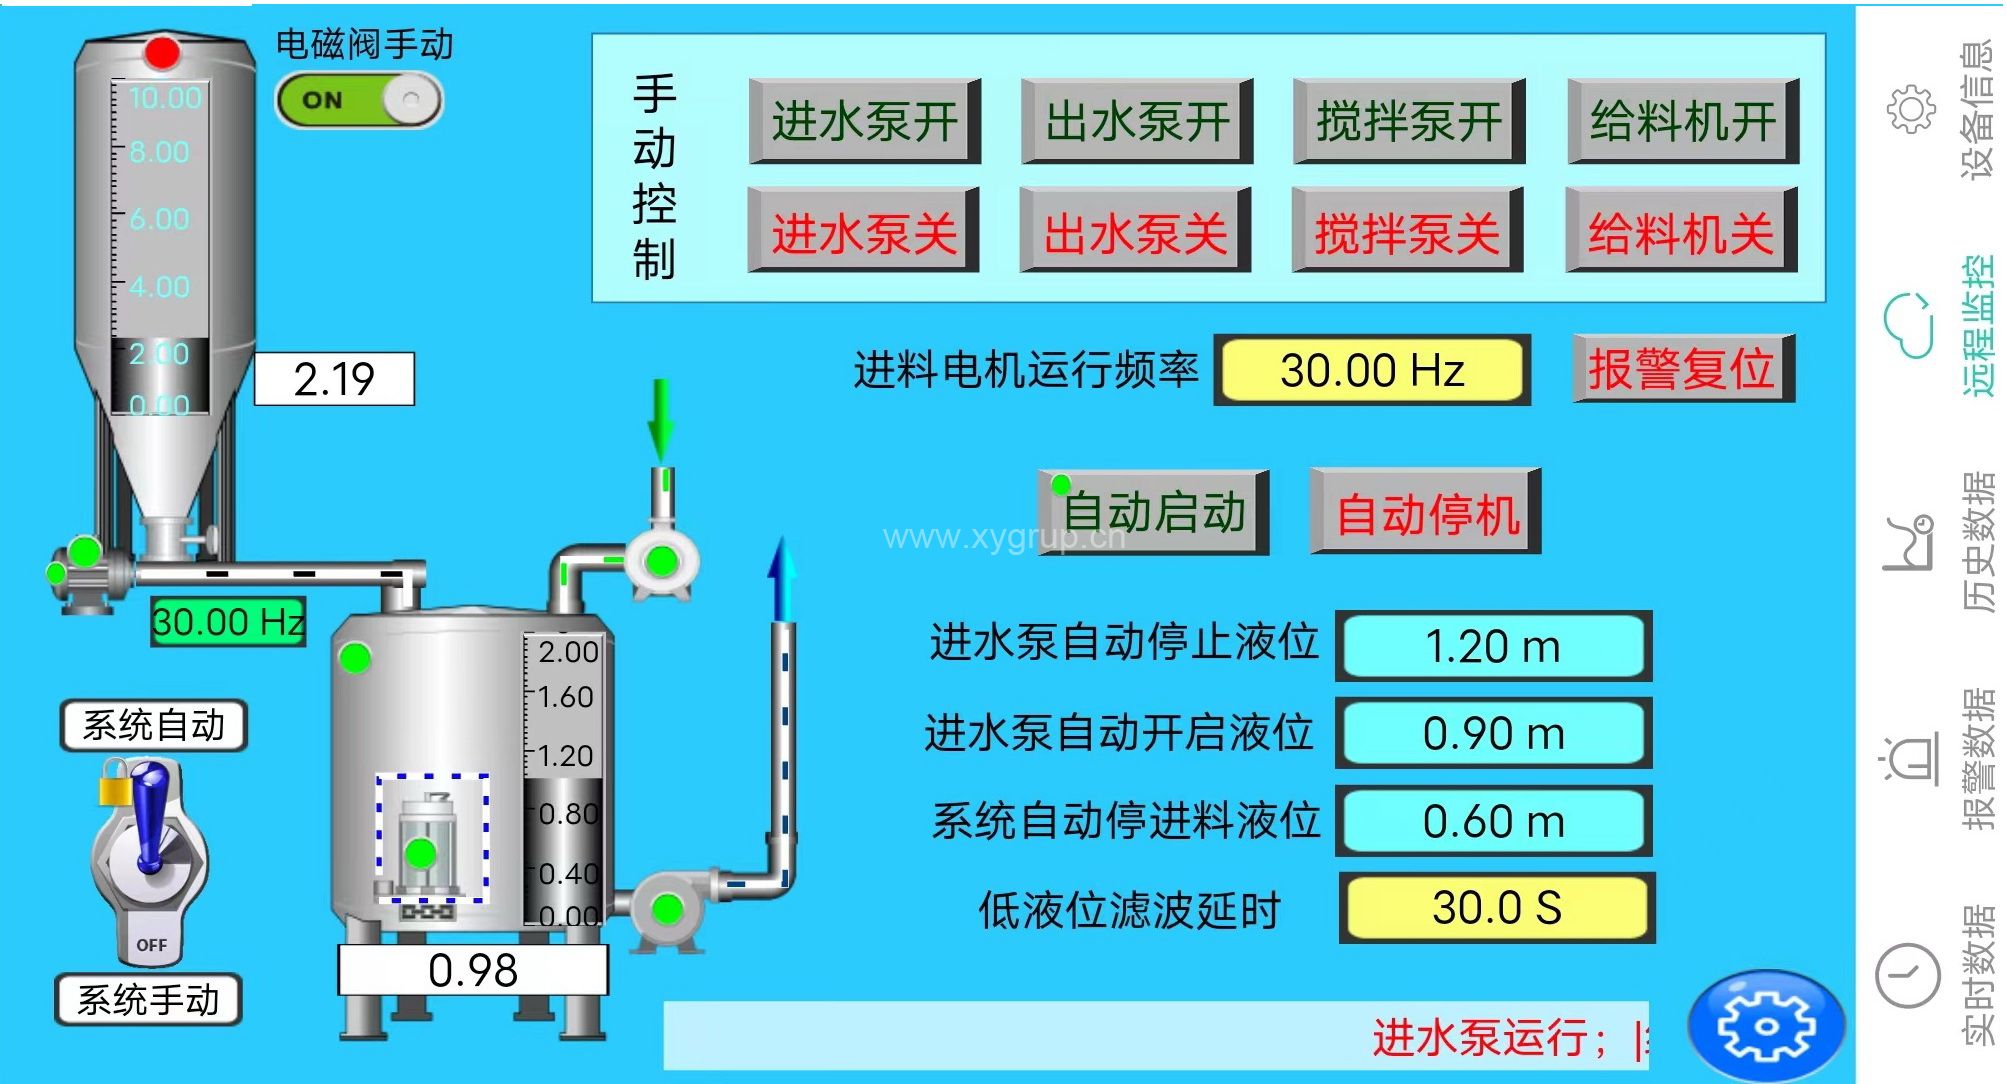 Best Design  Of  The Activated Carbon Auto Feeding Tank System For Sewage Treatment Plant 